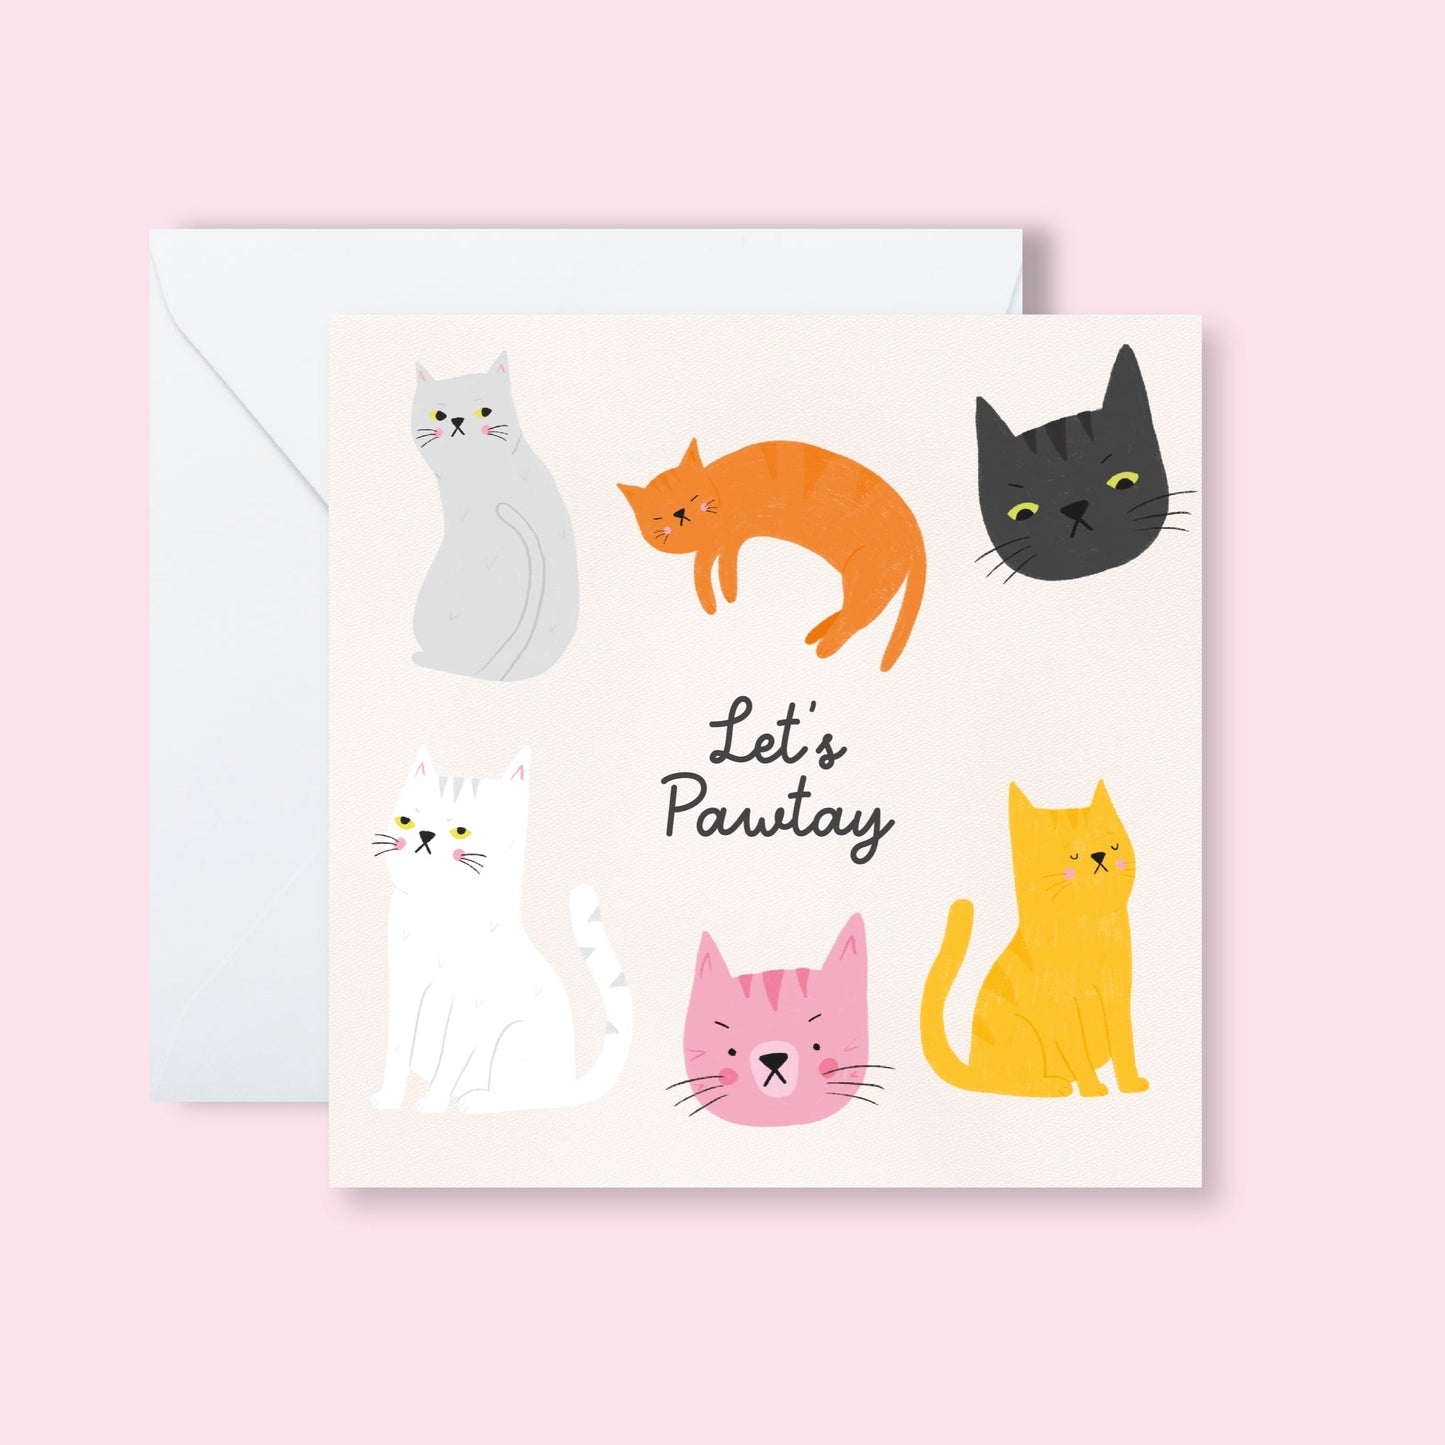 Let's Pawtay Greetings Card